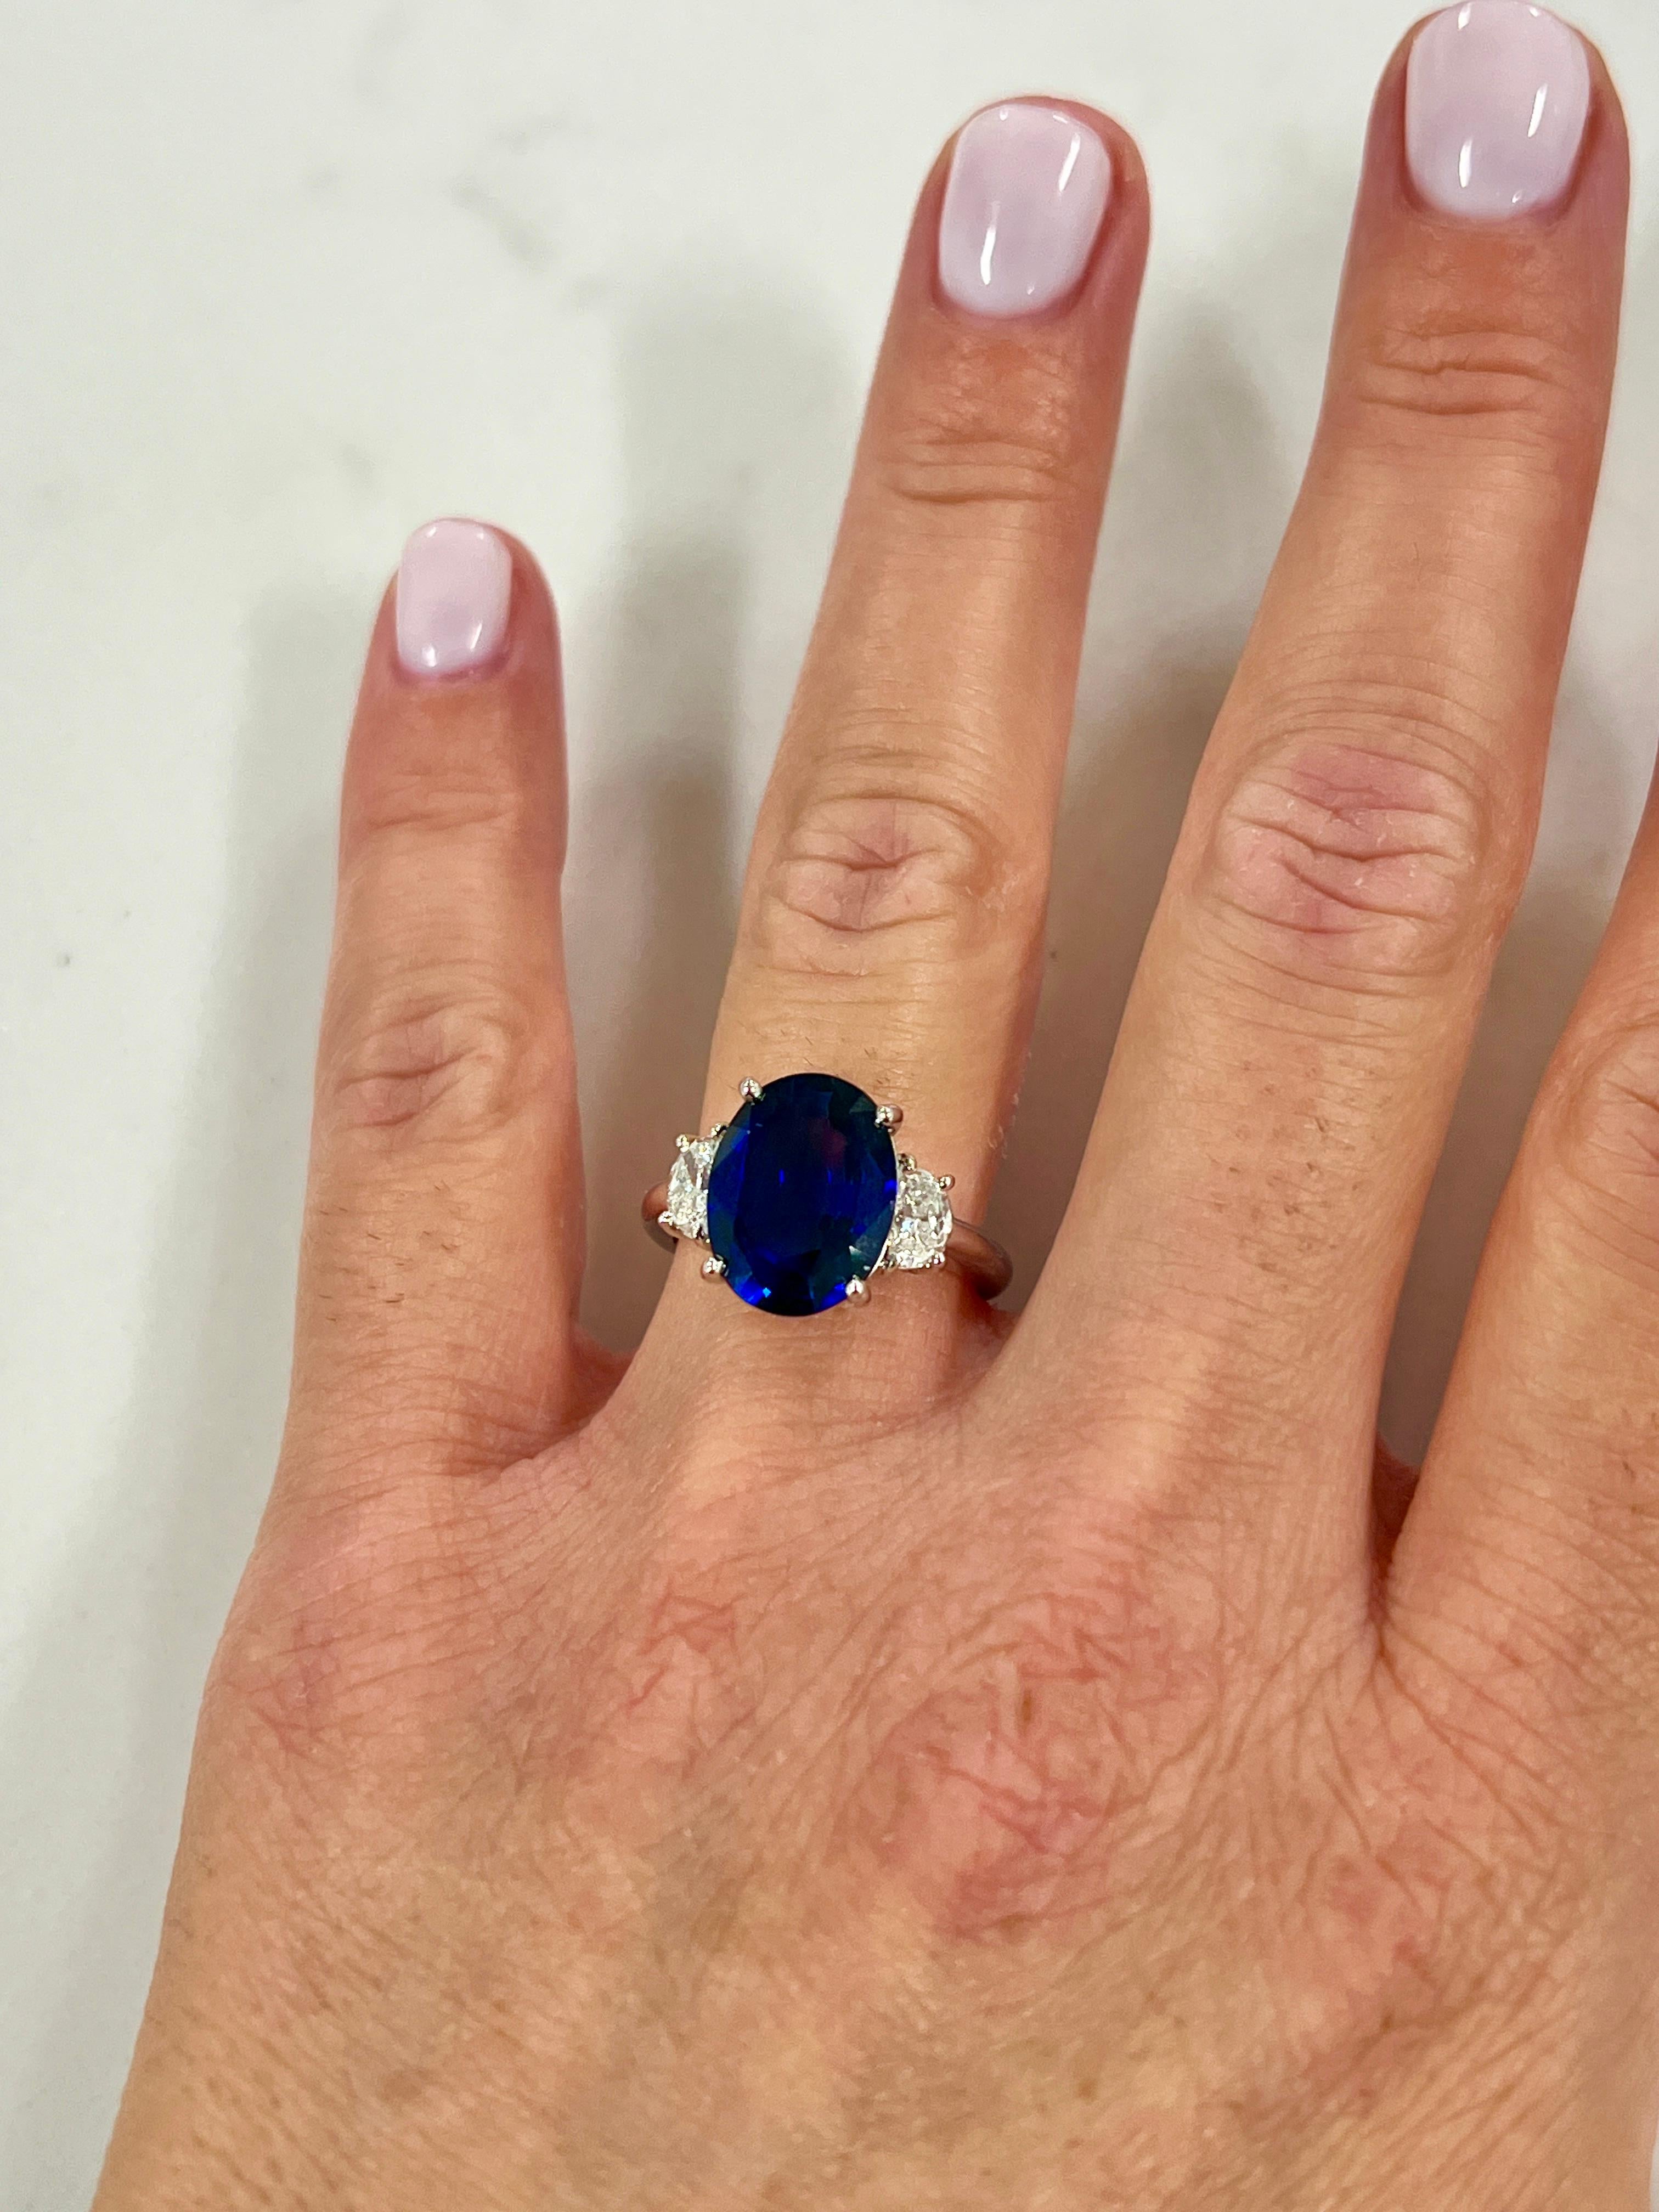 Stunning 5.05 ct Oval Ceylon natural sapphire ring. The sapphire comes with a CDC certificate stating the origin of Ceylon and heat only. The sapphire is set with two half-moon diamonds weighing .60 ct total and graded G-H in color and VS2-SI1 in